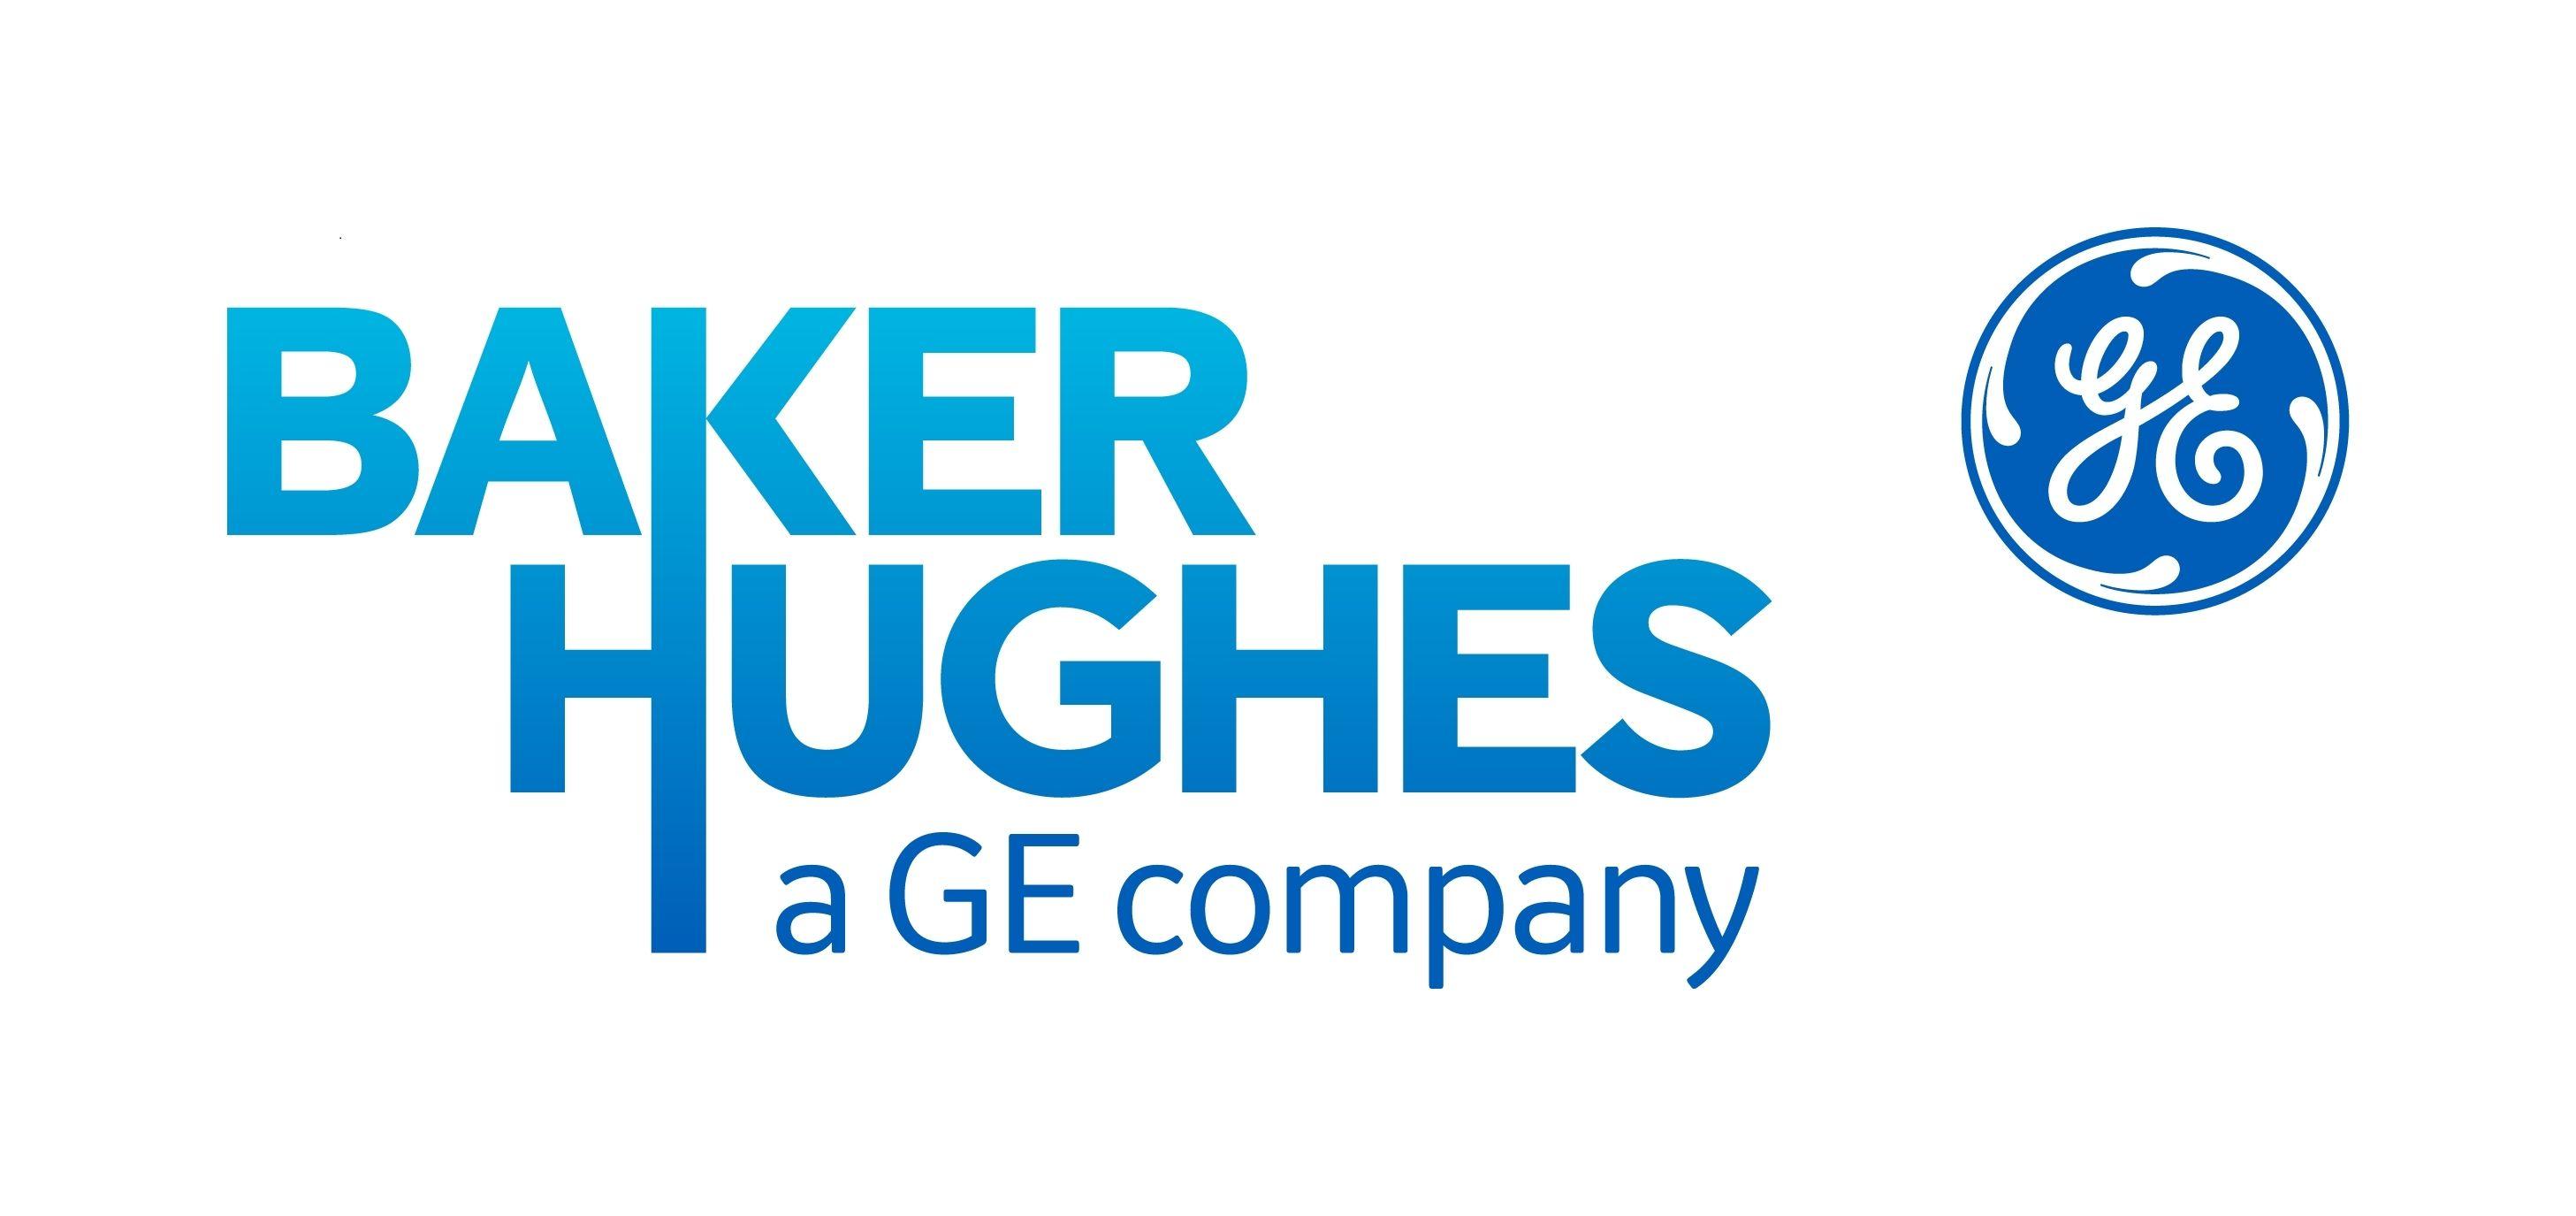 Small General Electric Logo - Baker Hughes, a GE company and General Electric Company Announce a